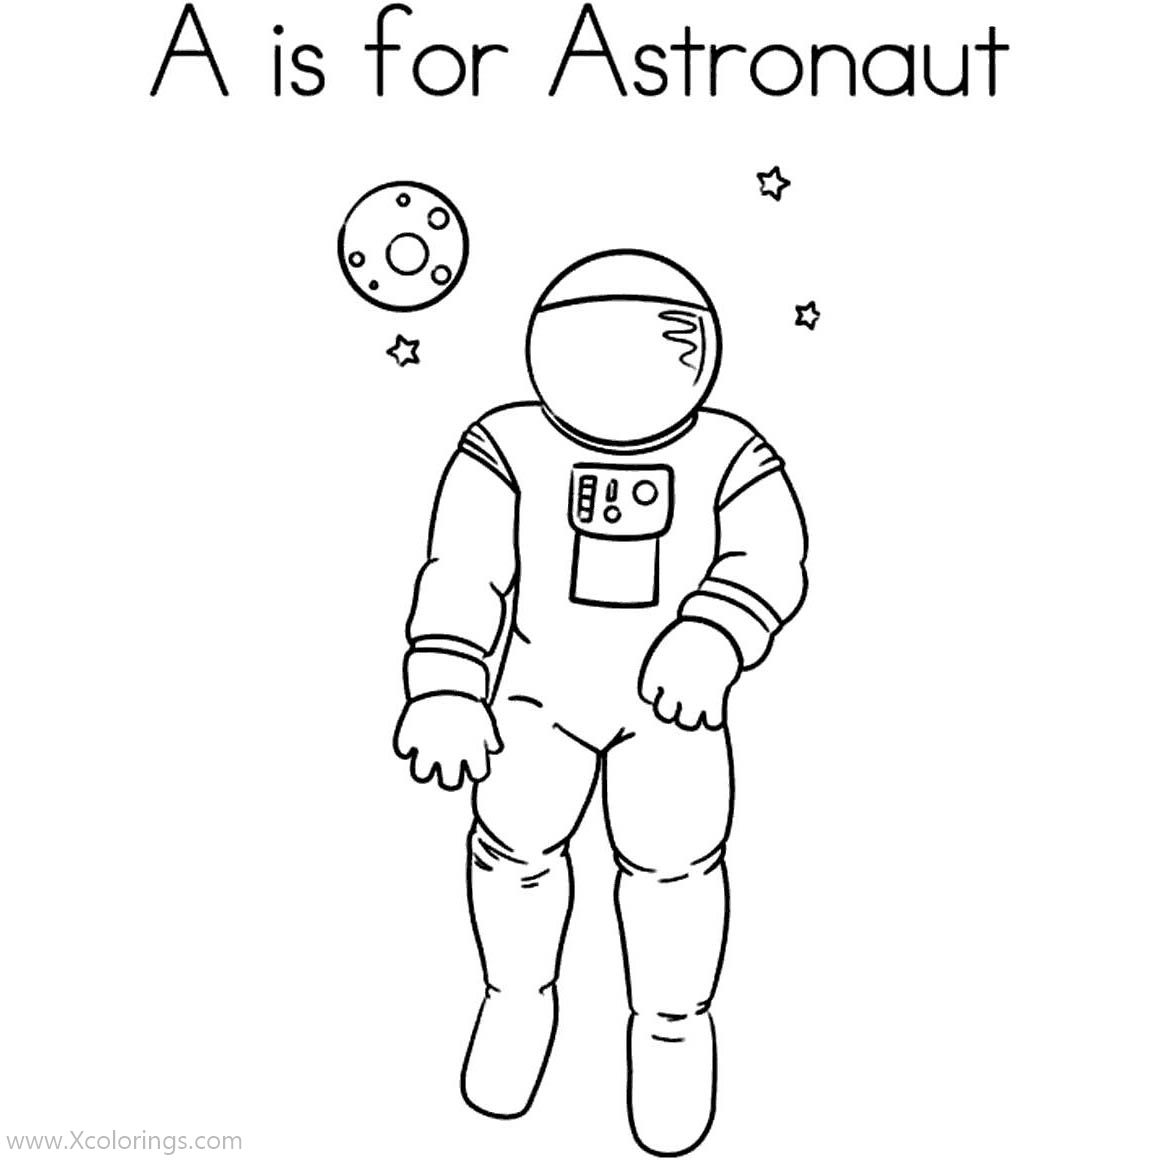 Free A is for Astronaut Coloring Pages printable